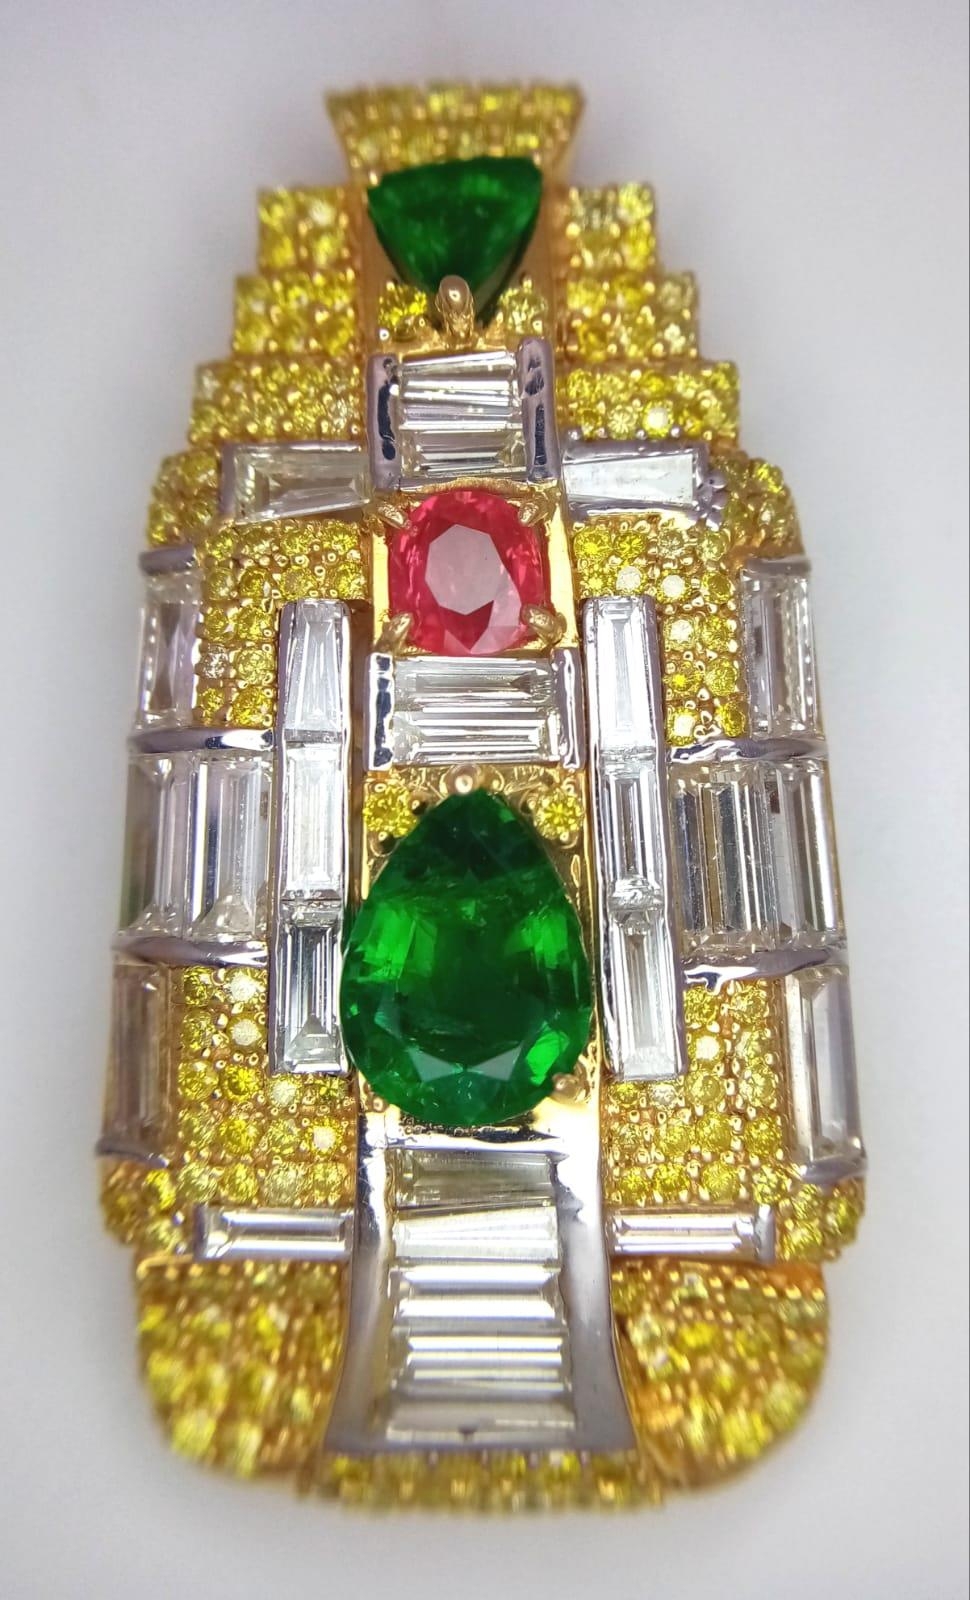 An Art Deco Style 18K Yellow Gold Gemstone Pendant - Set with two triangular emeralds and an oval